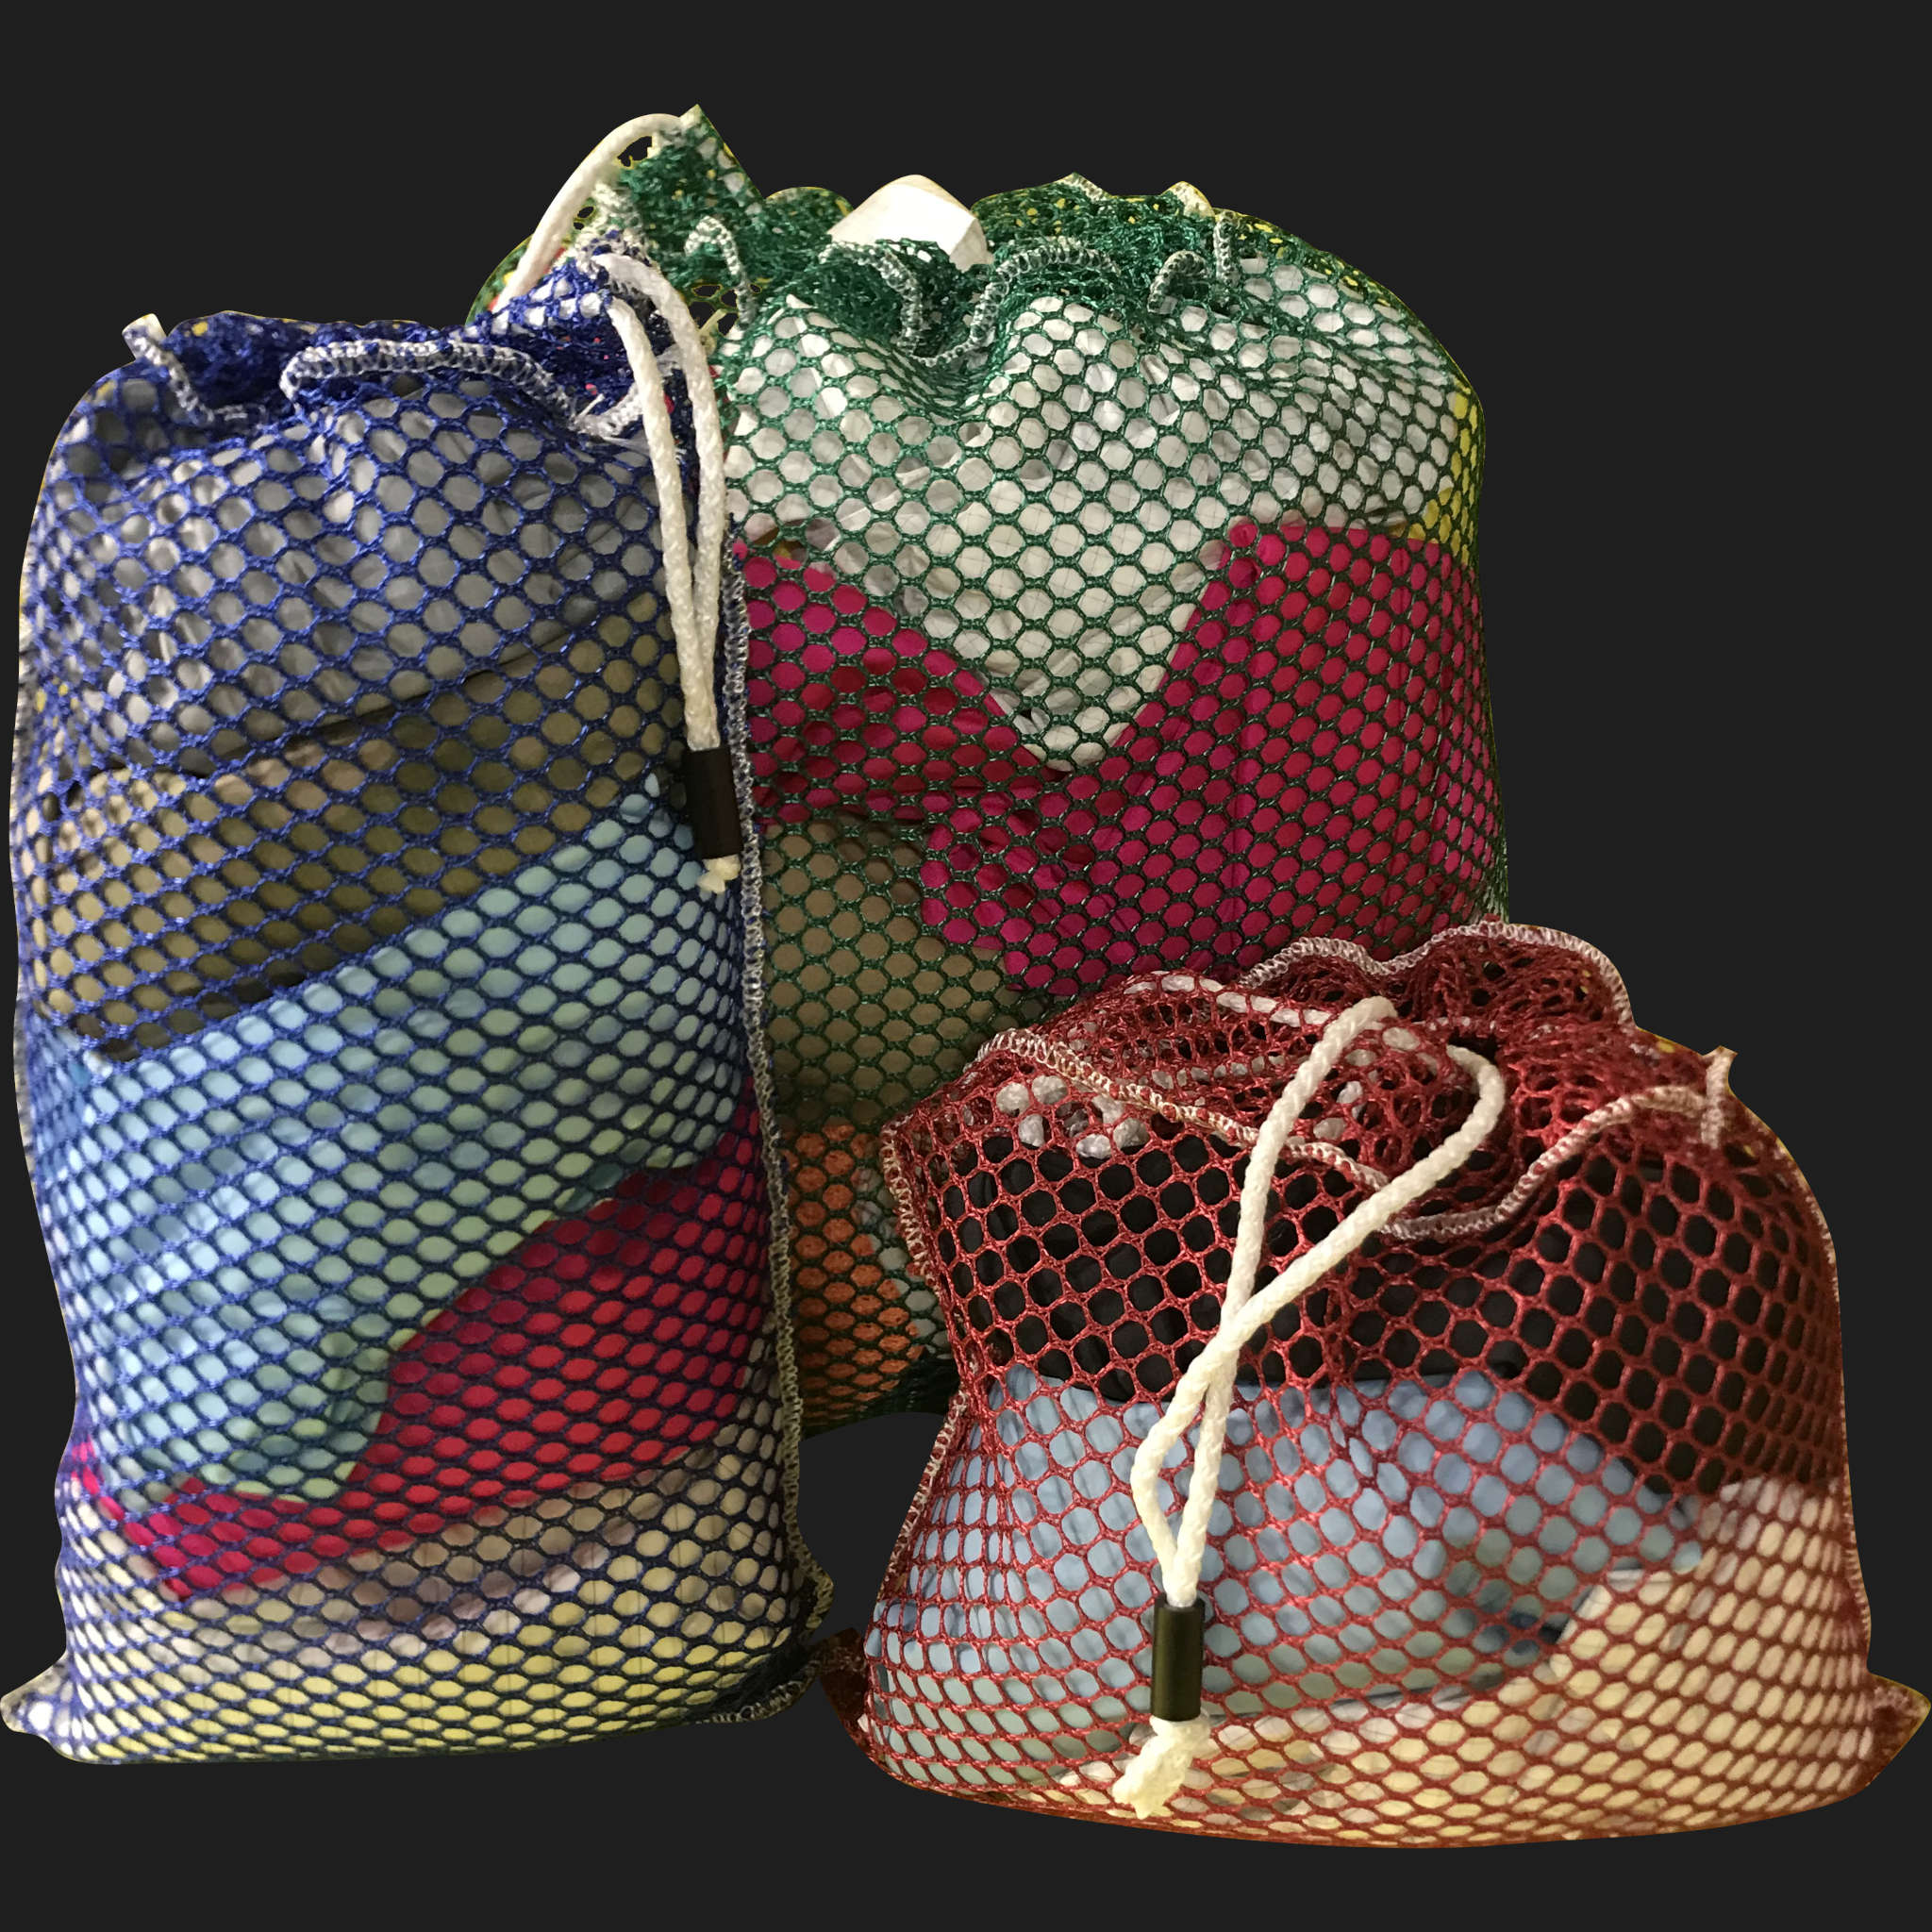 26" x 44" Customized Mesh-Net-Laundry Bags Heavy Duty with Cord and barrellock closure